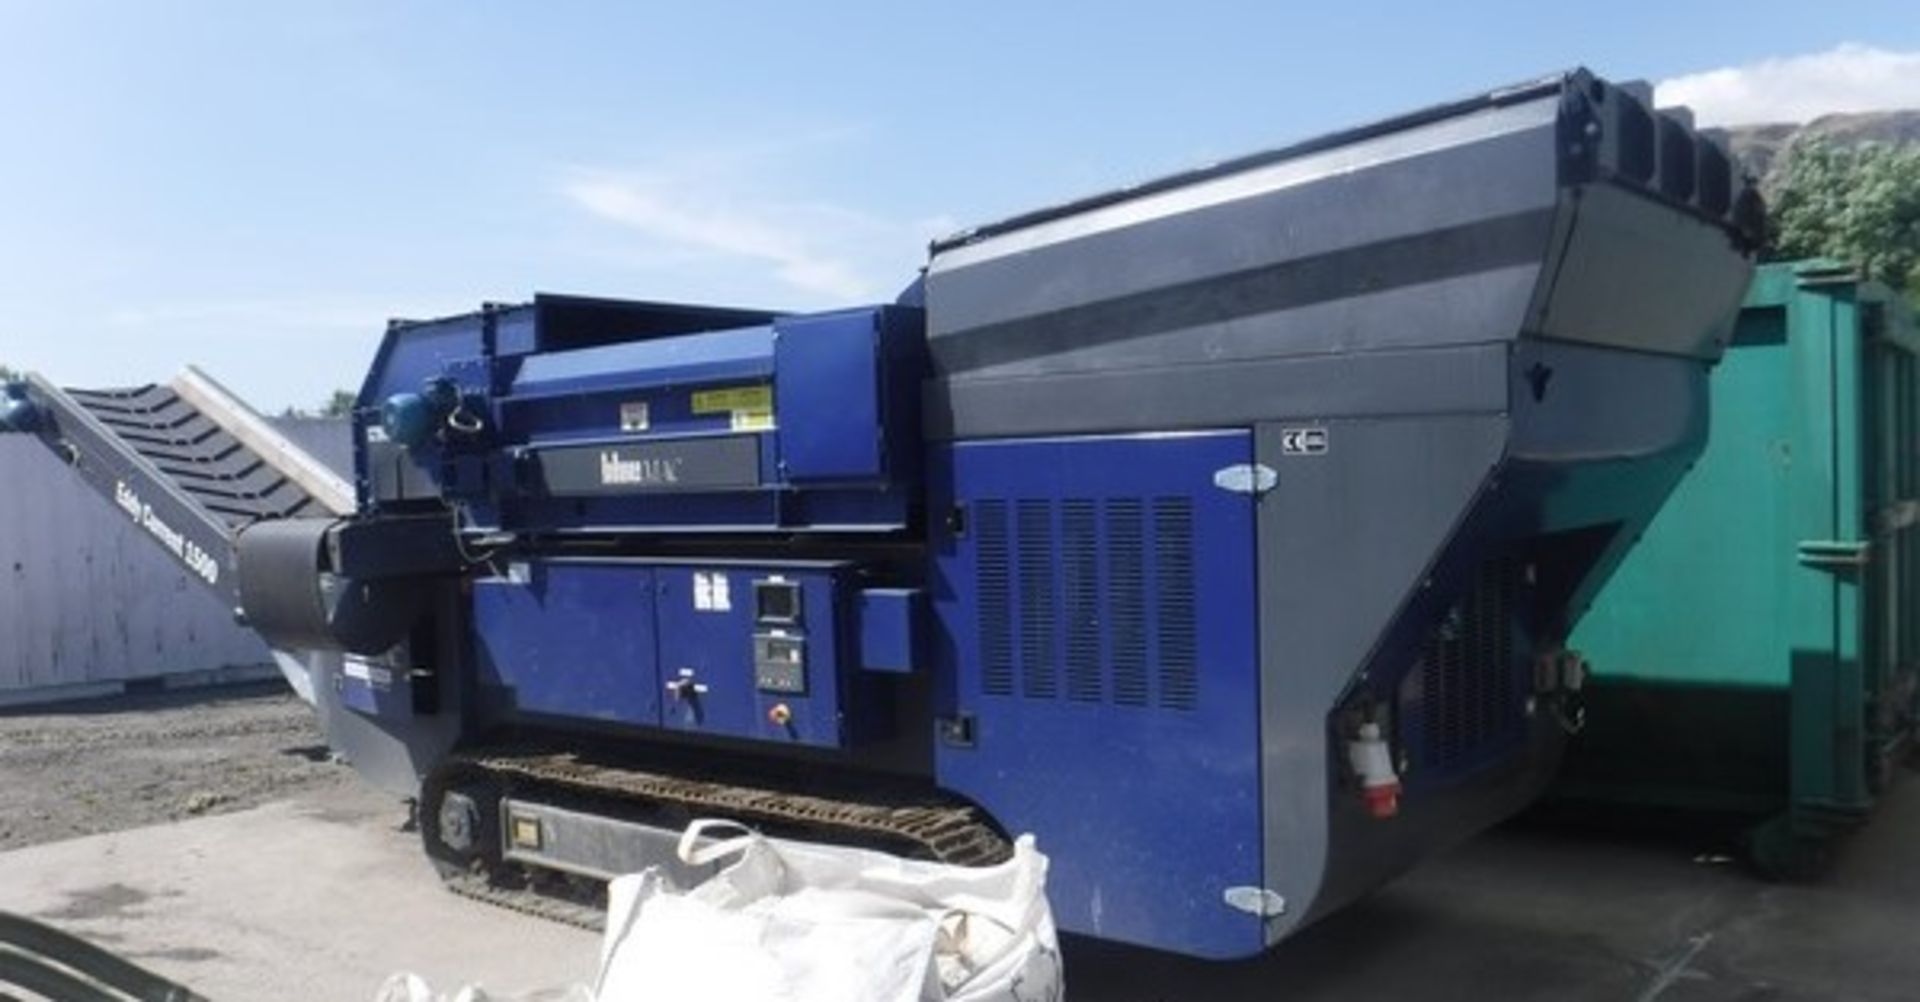 2014 BLUE MAC MANUFACTURING LTD Eddy Current Separator (ECS) s/n 6000-010 only used for woodchip wor - Image 2 of 27